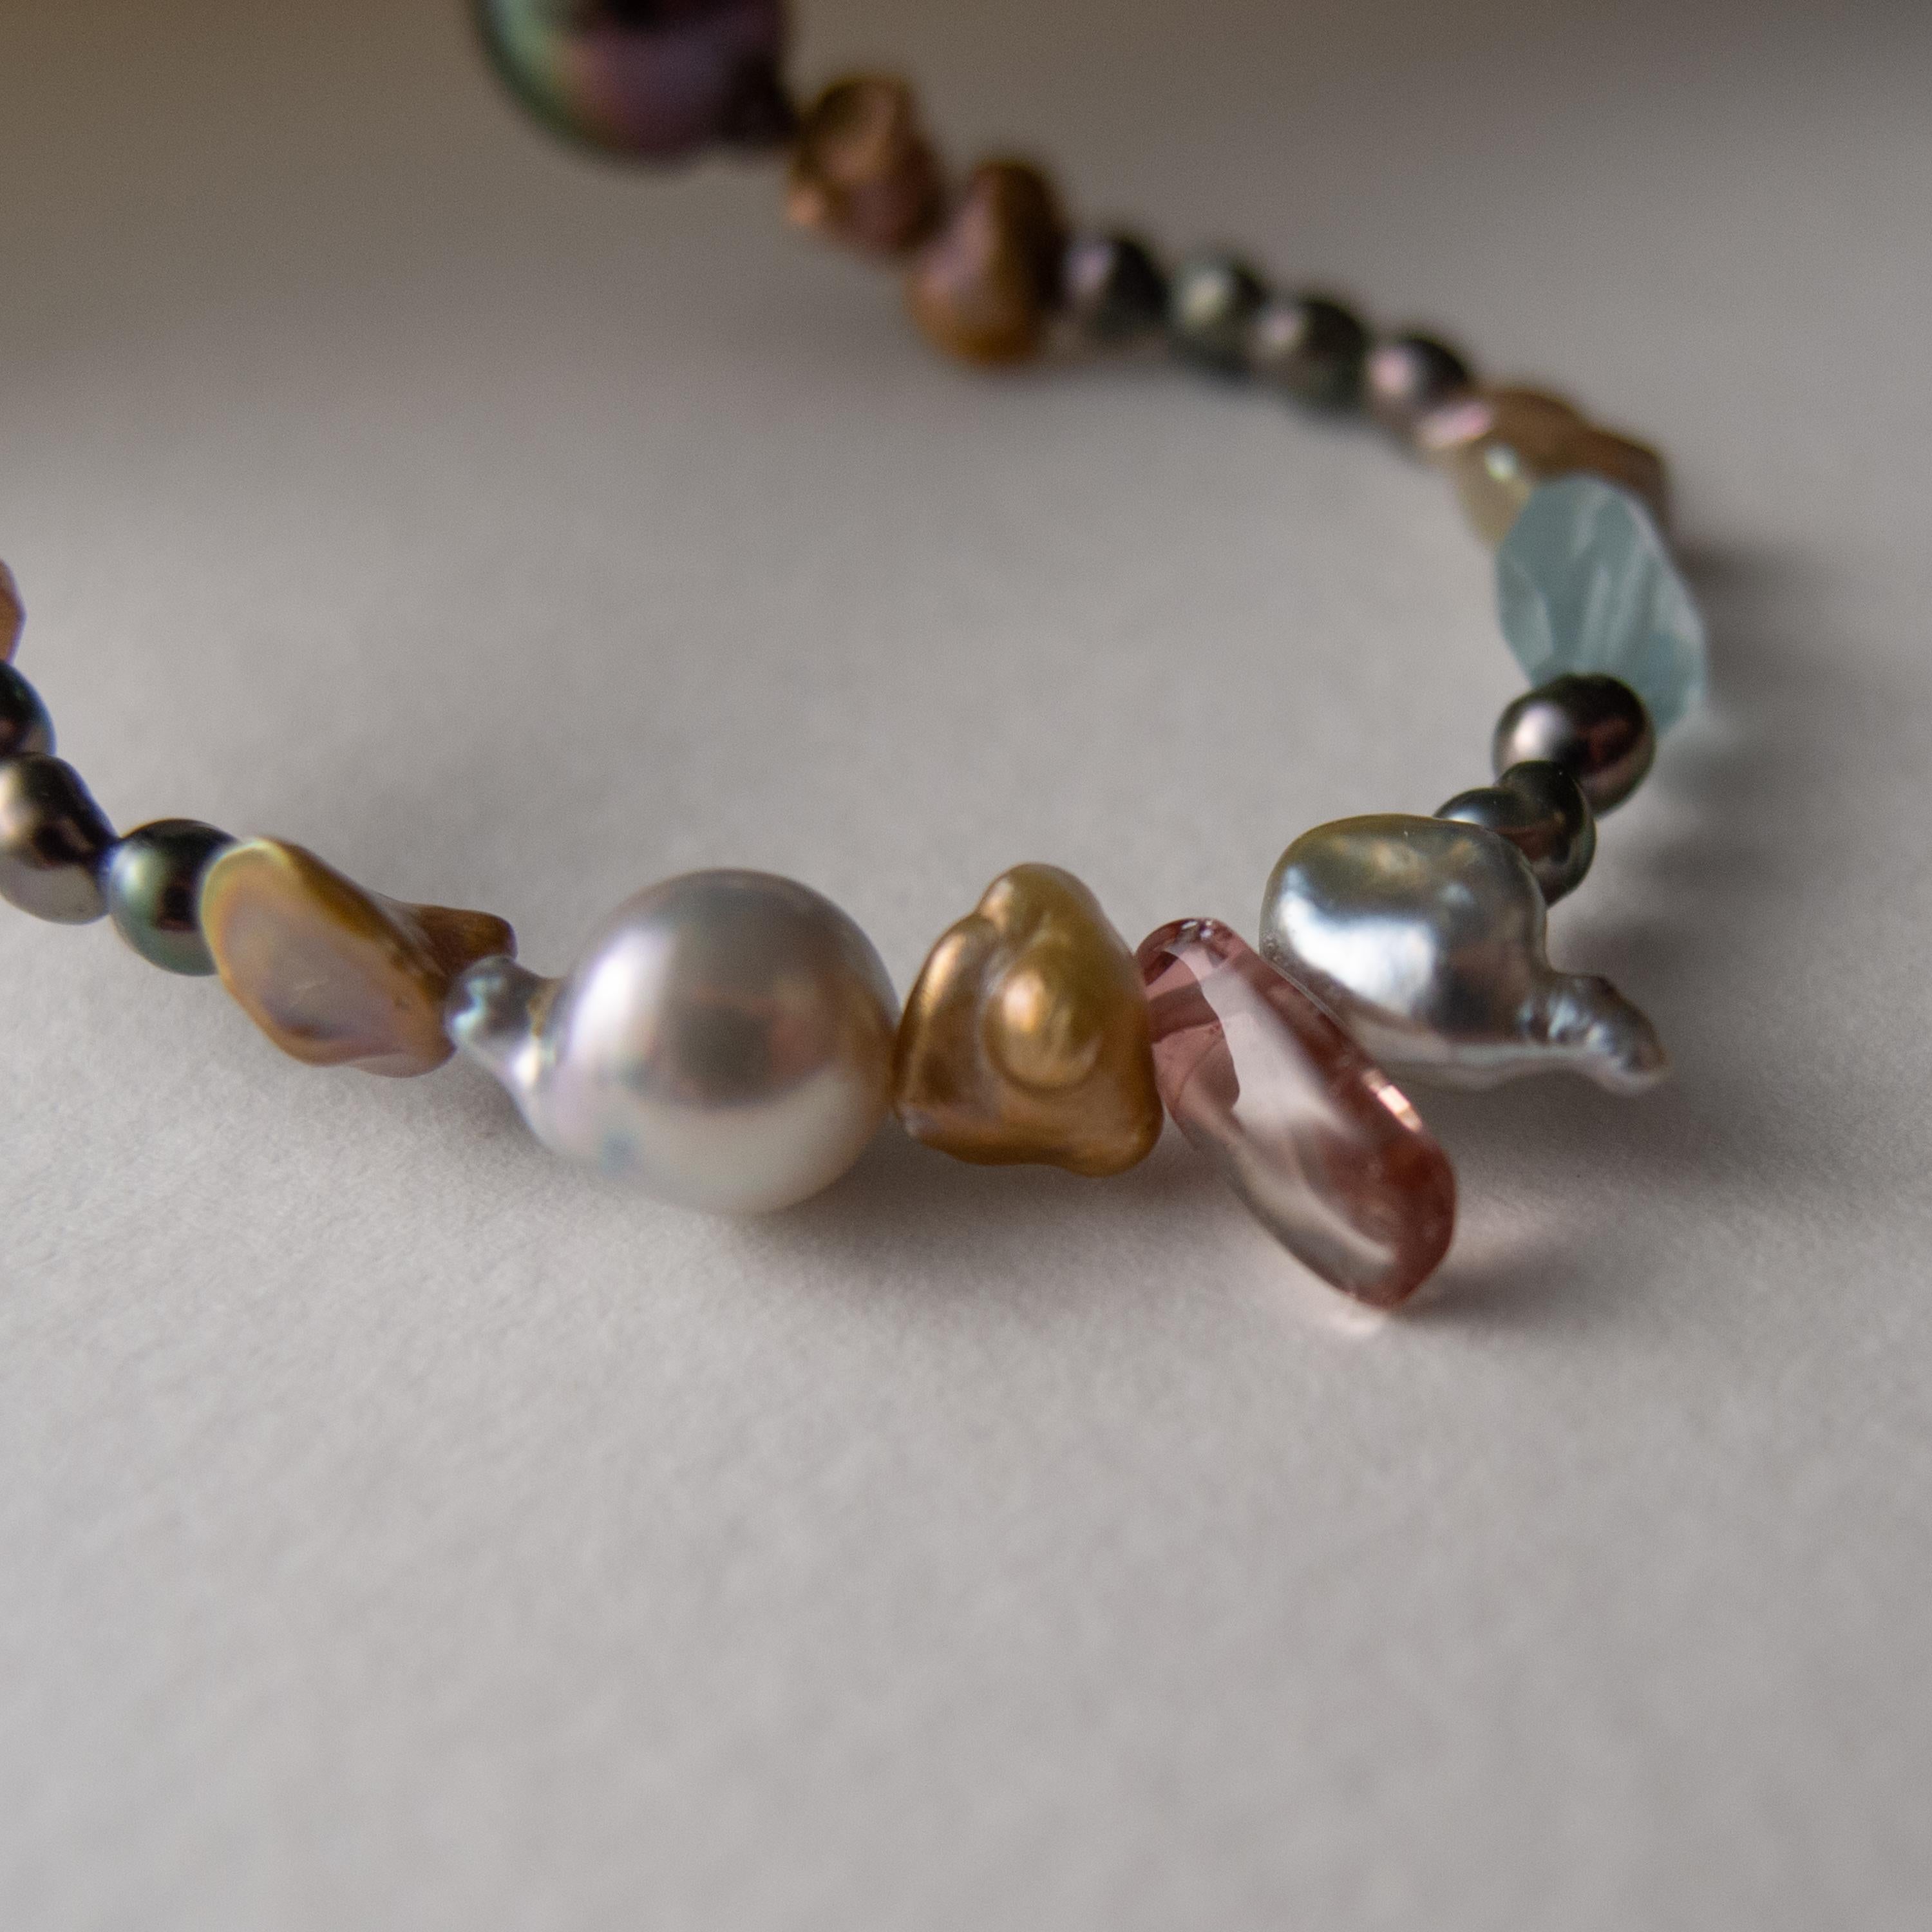 Pearl and Gemstone Necklace 36